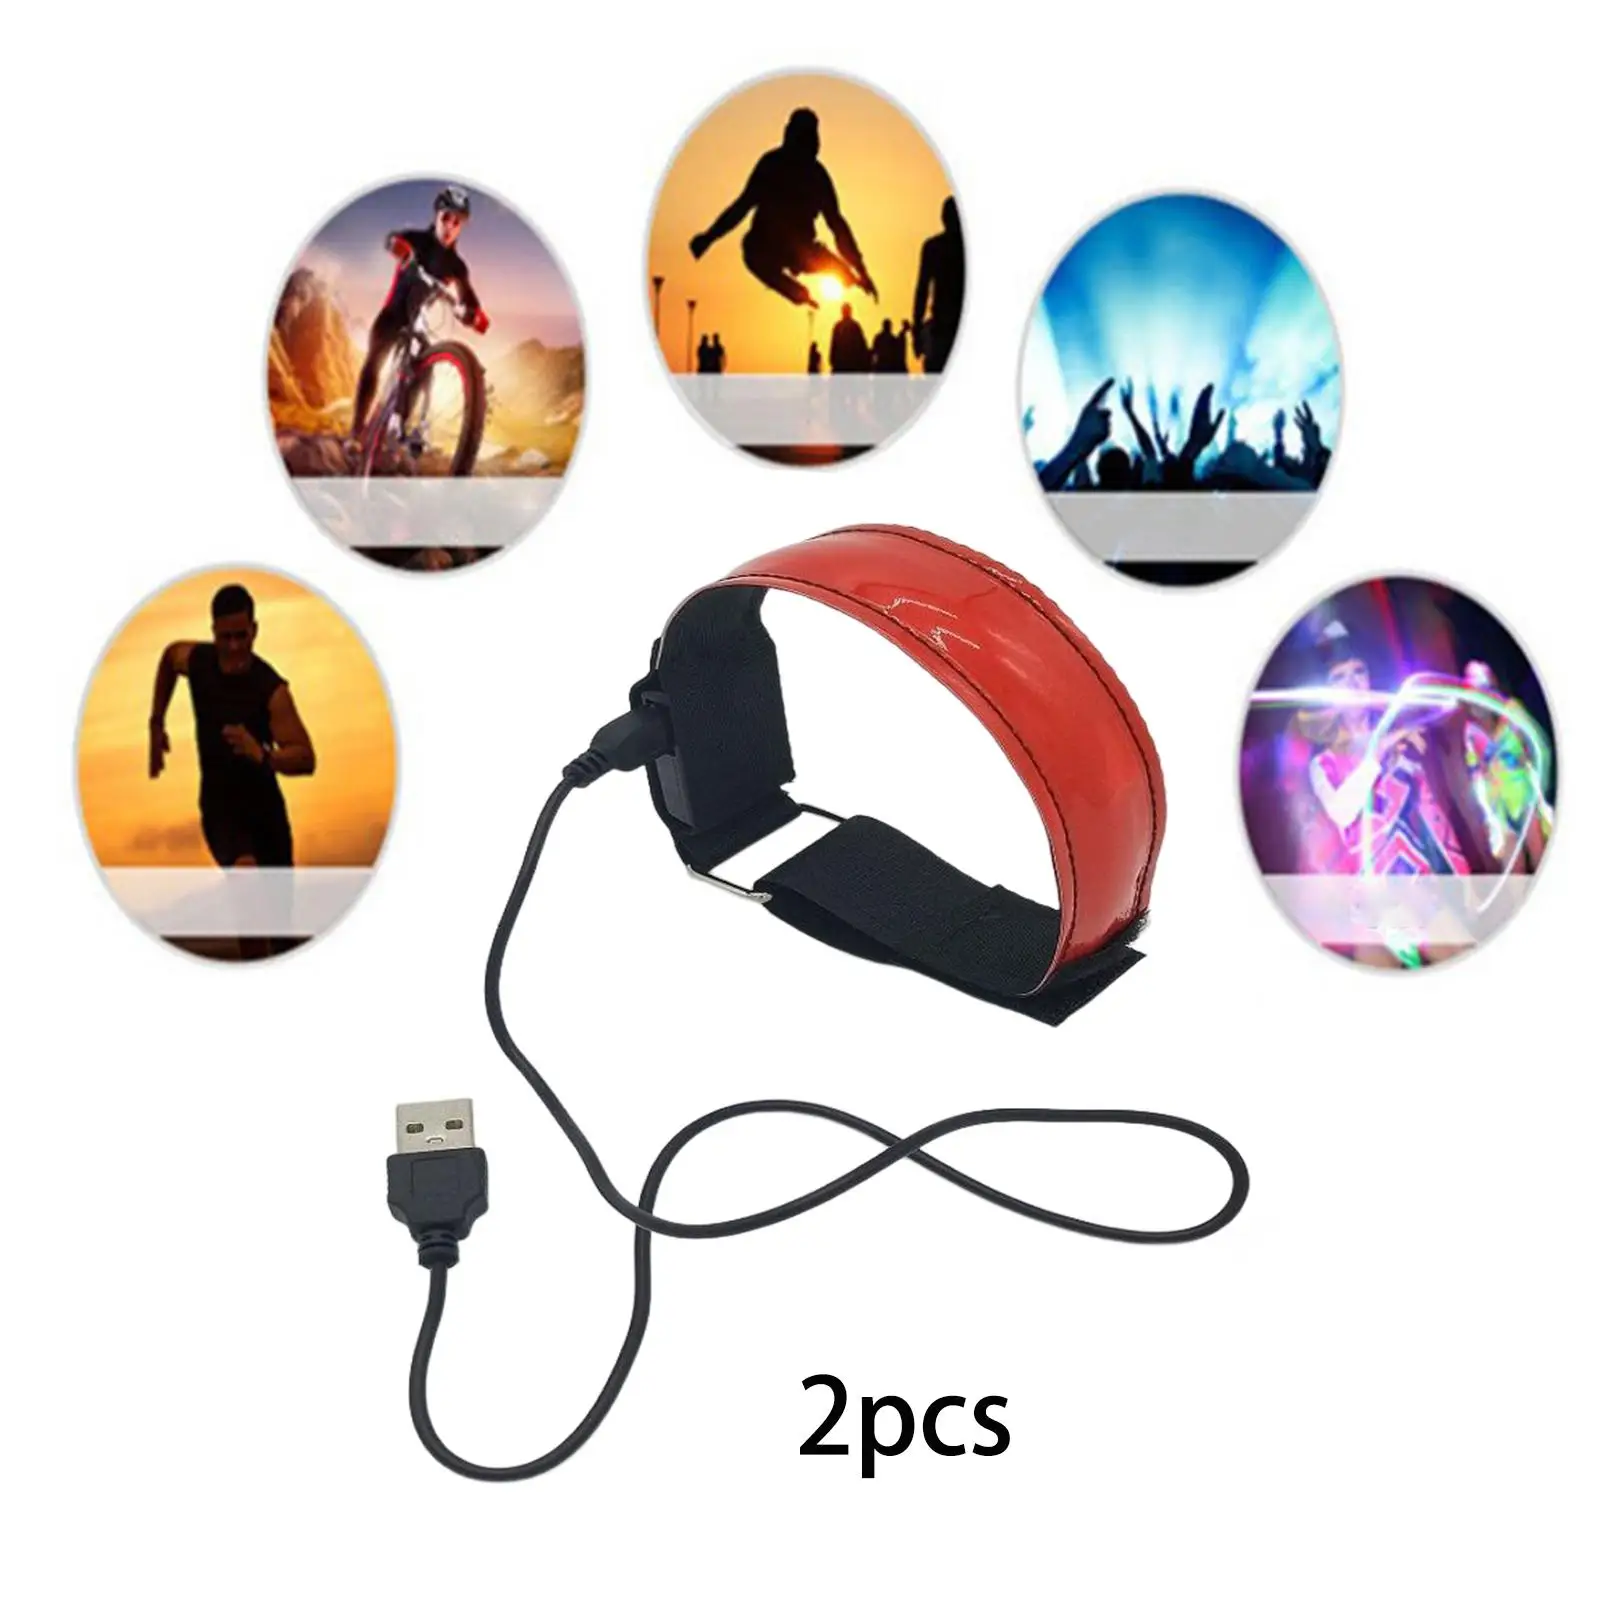 2Pcs USB Rechargeable LED Lights Armbands High Visibility Gift Straps